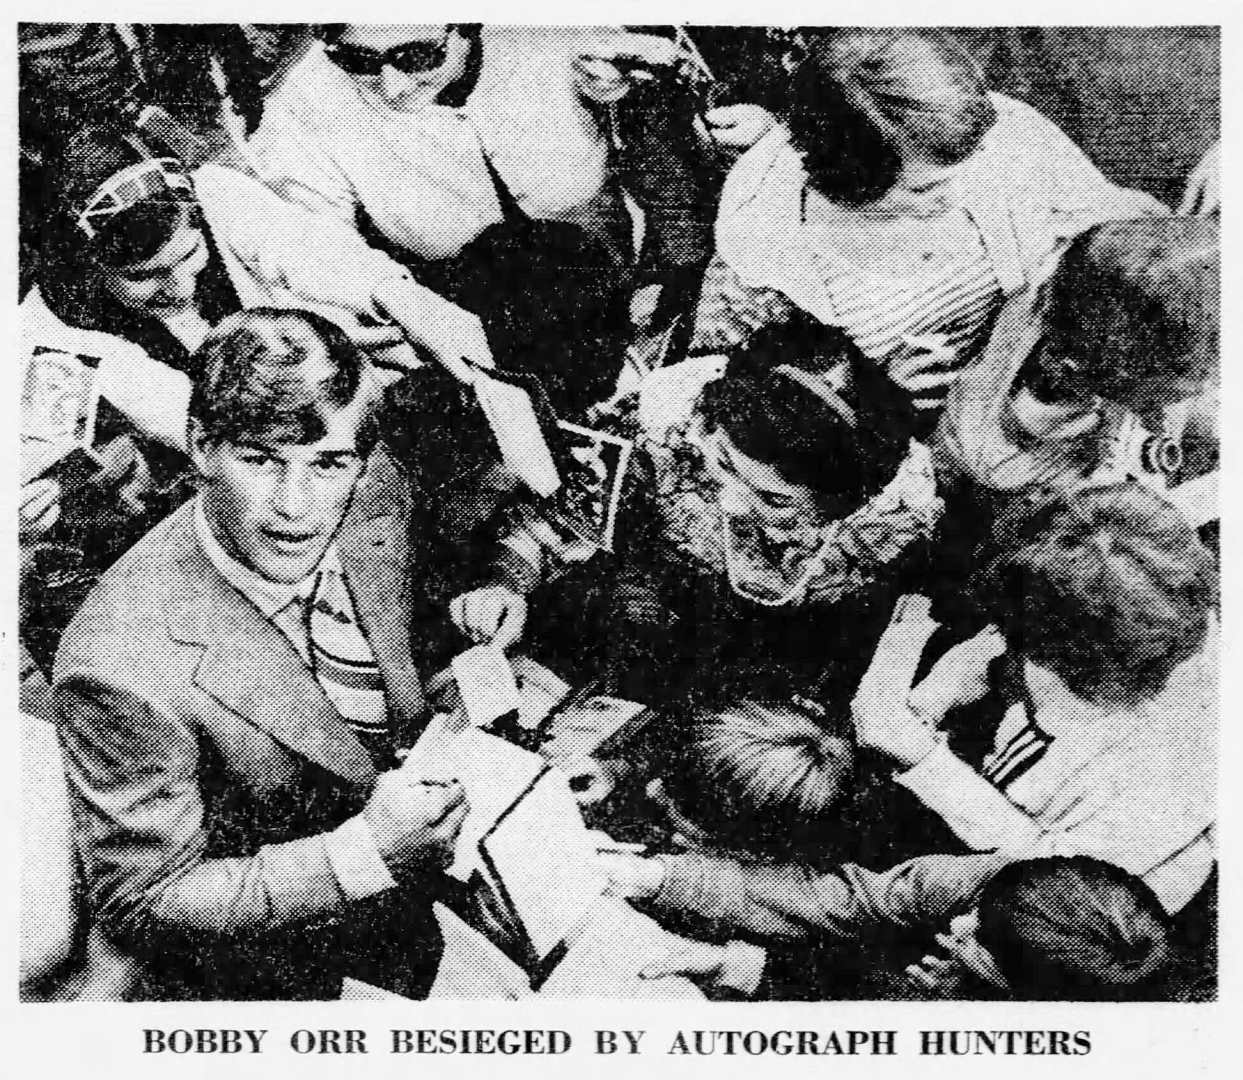 This Day In Hockey History-July 6, 1970-Parry Sound Holds Bobby Orr Day